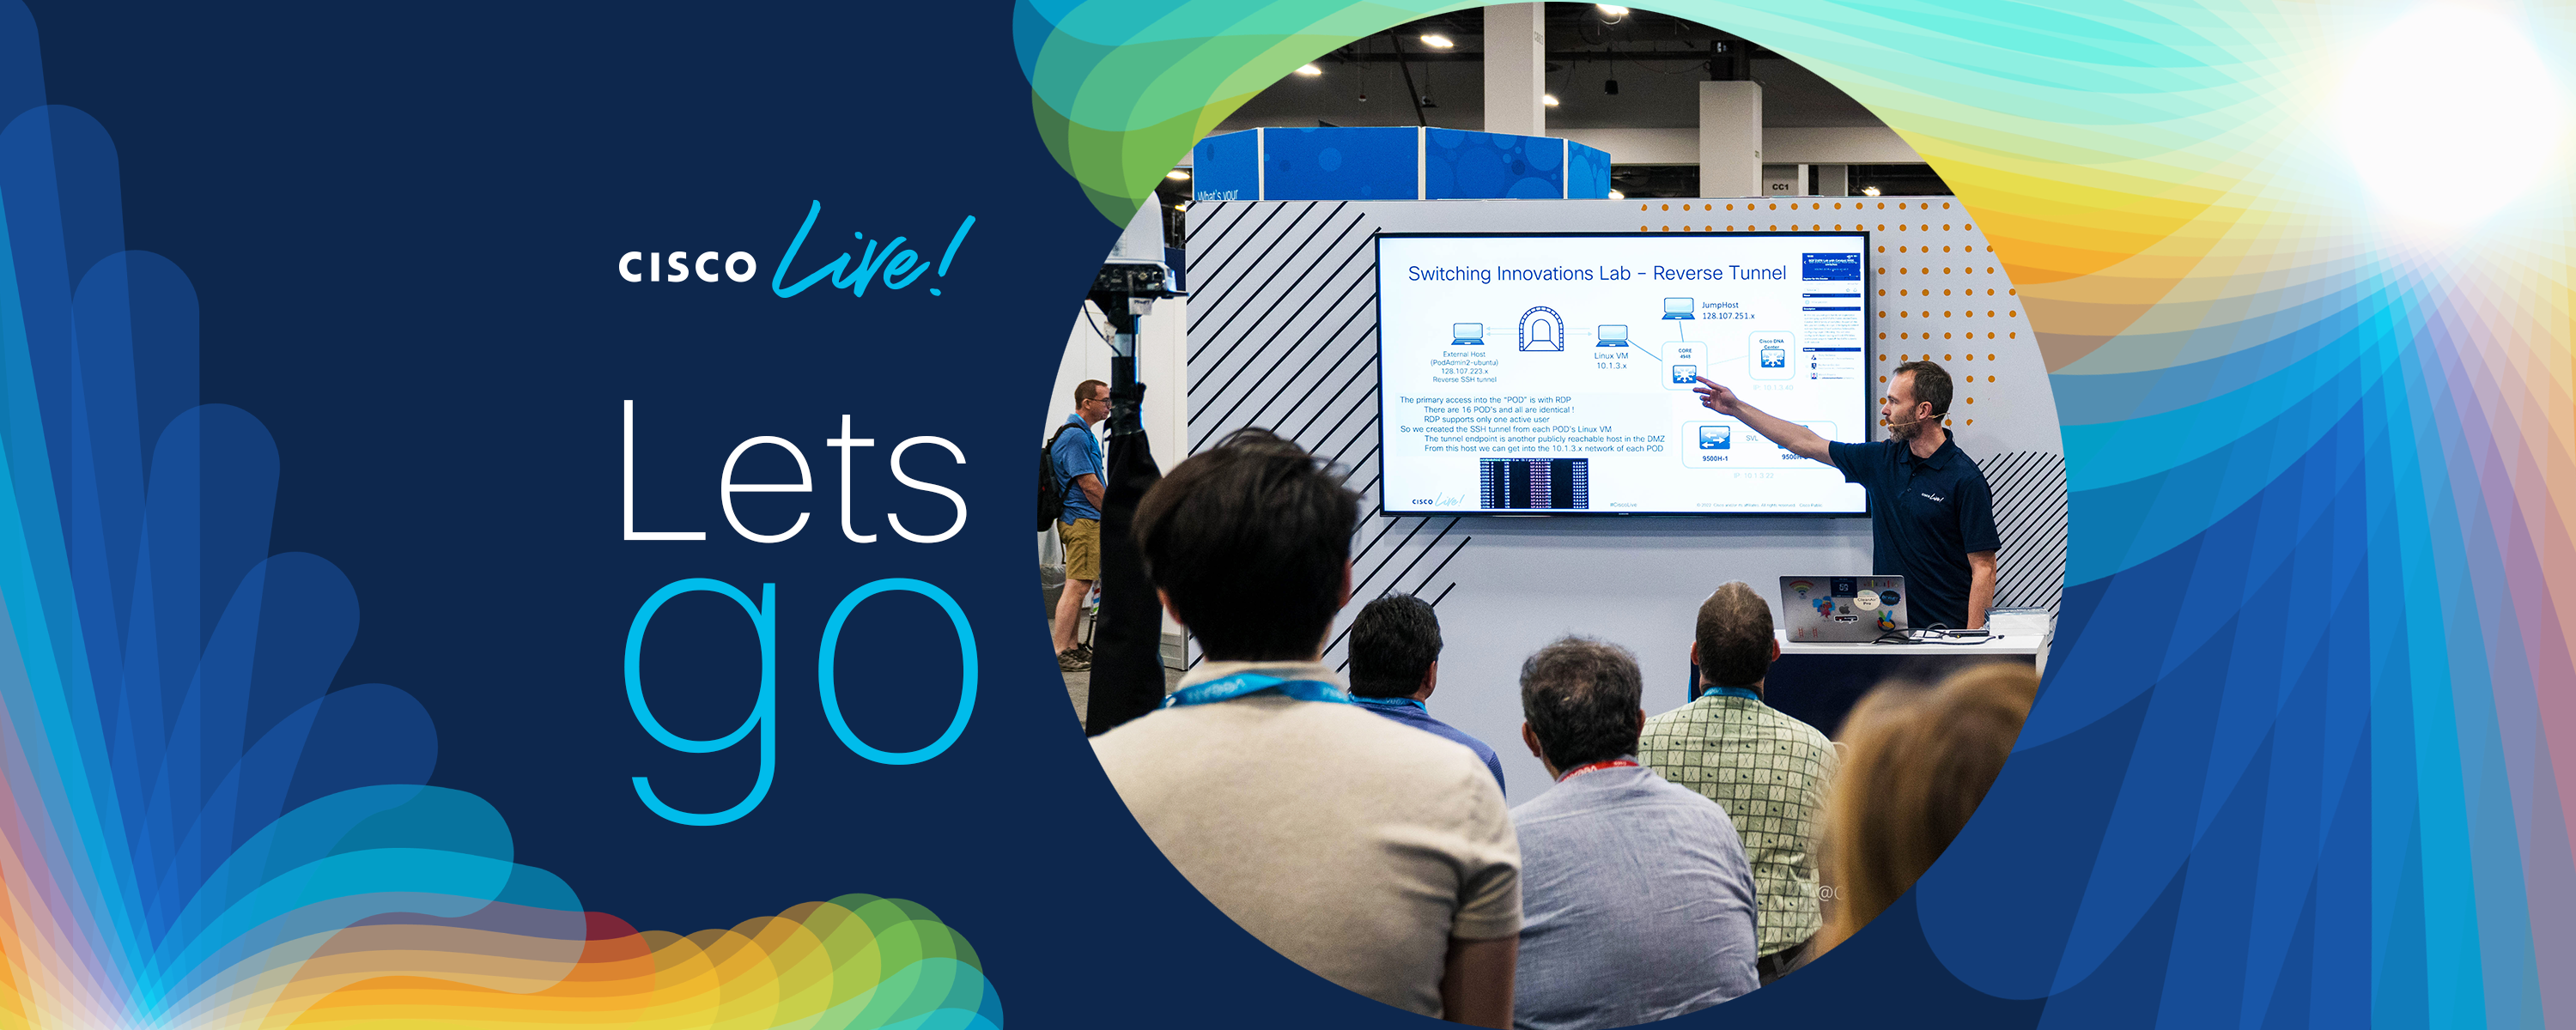 Cisco Switching Platform and Software Sessions at Cisco Live